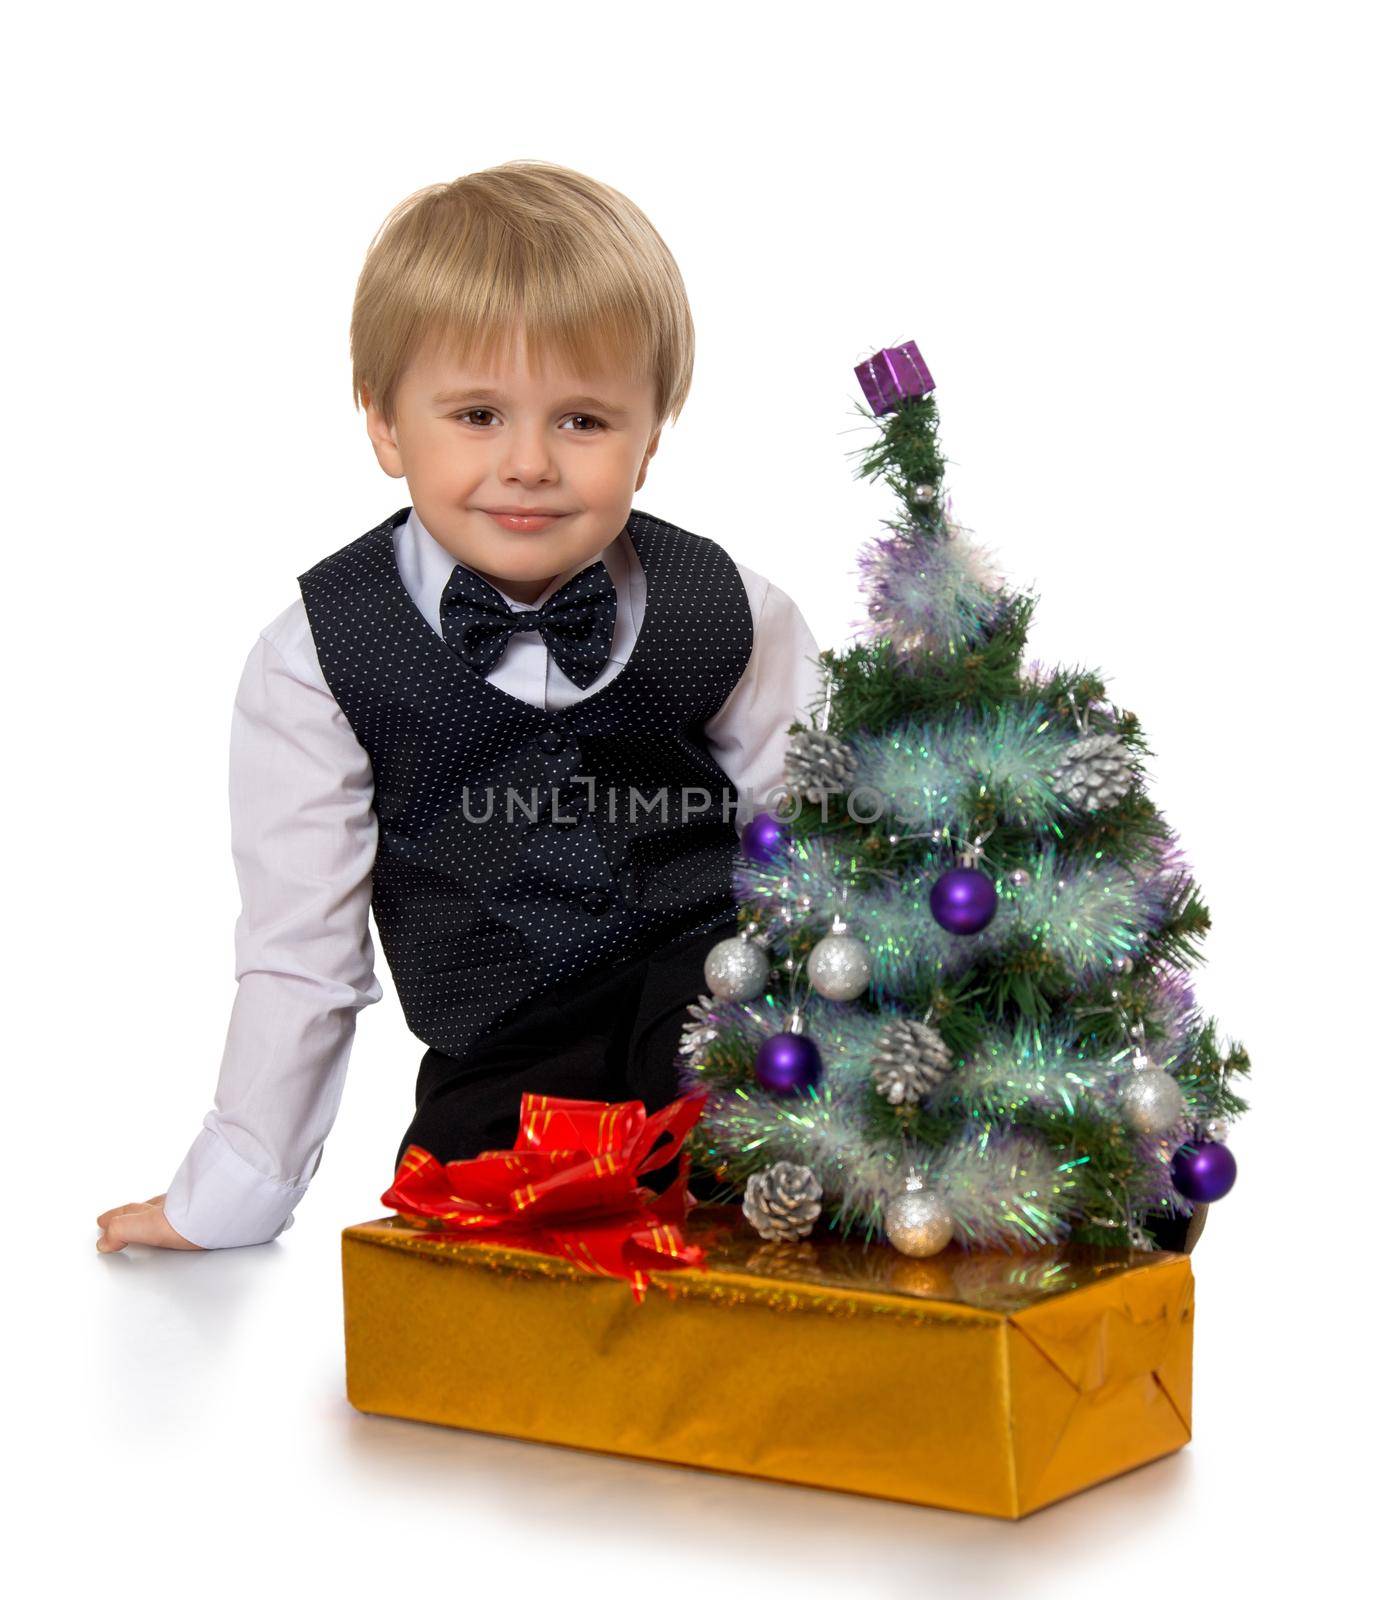 Cute little boy holding a gift - Isolated on white background